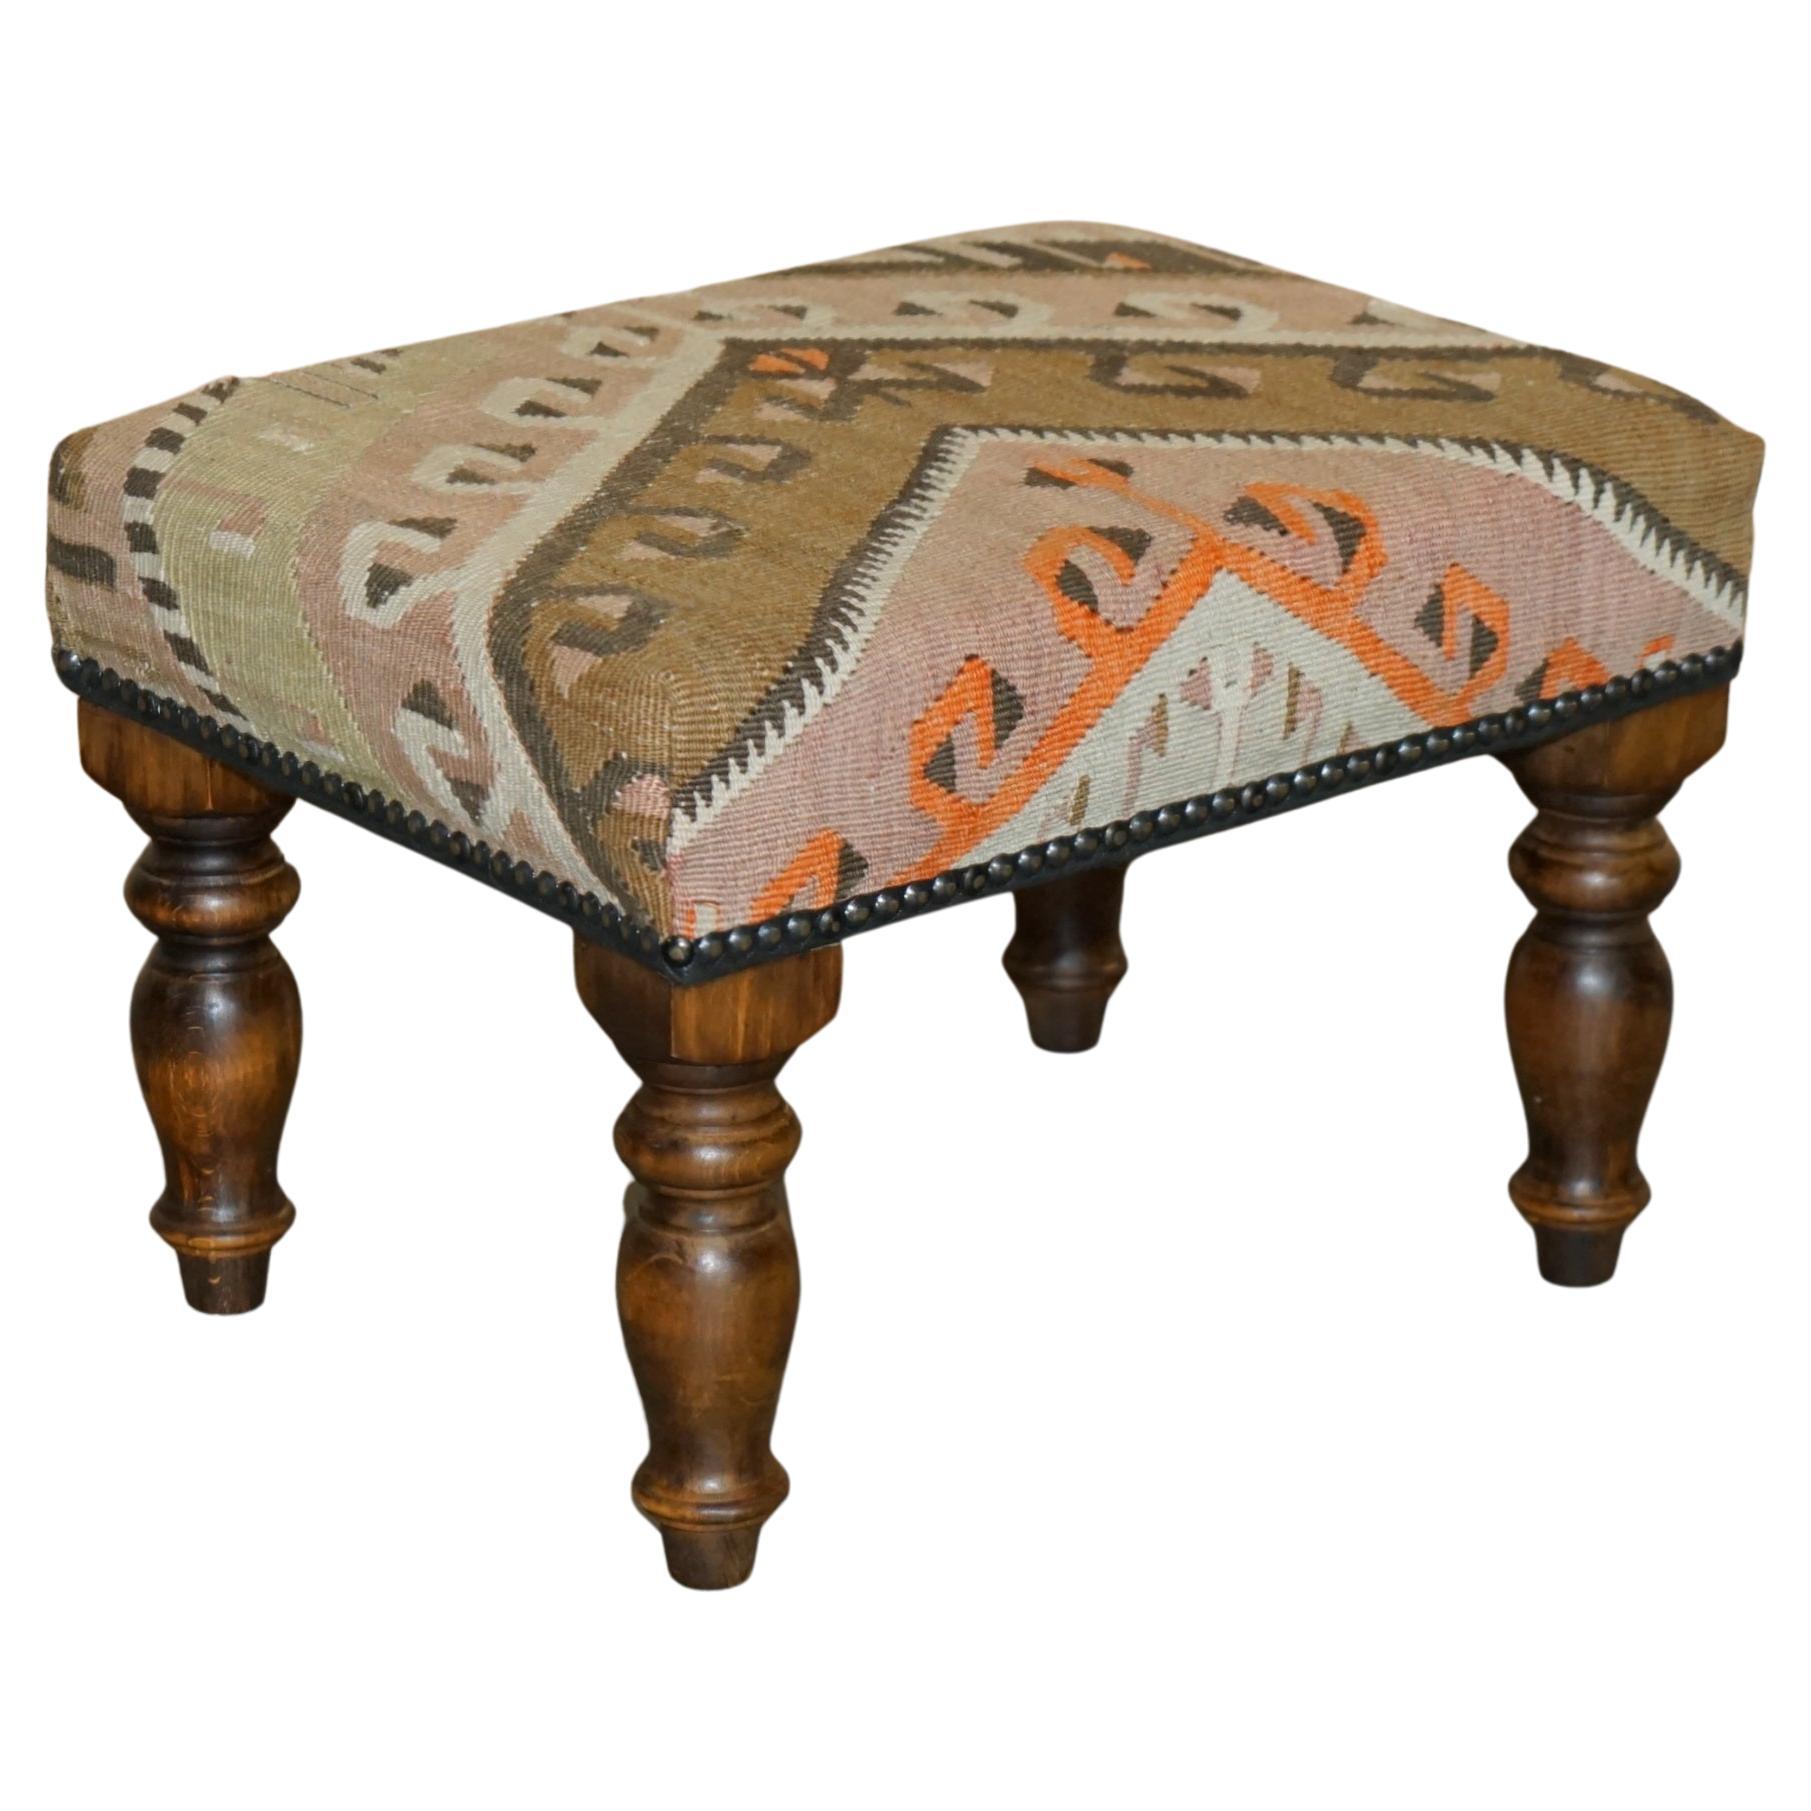 STUNNiNG & COLLECTABLE GEORGE SMITH CHELSEA KILIM FOOTSTOOL OTTOMAN en vente